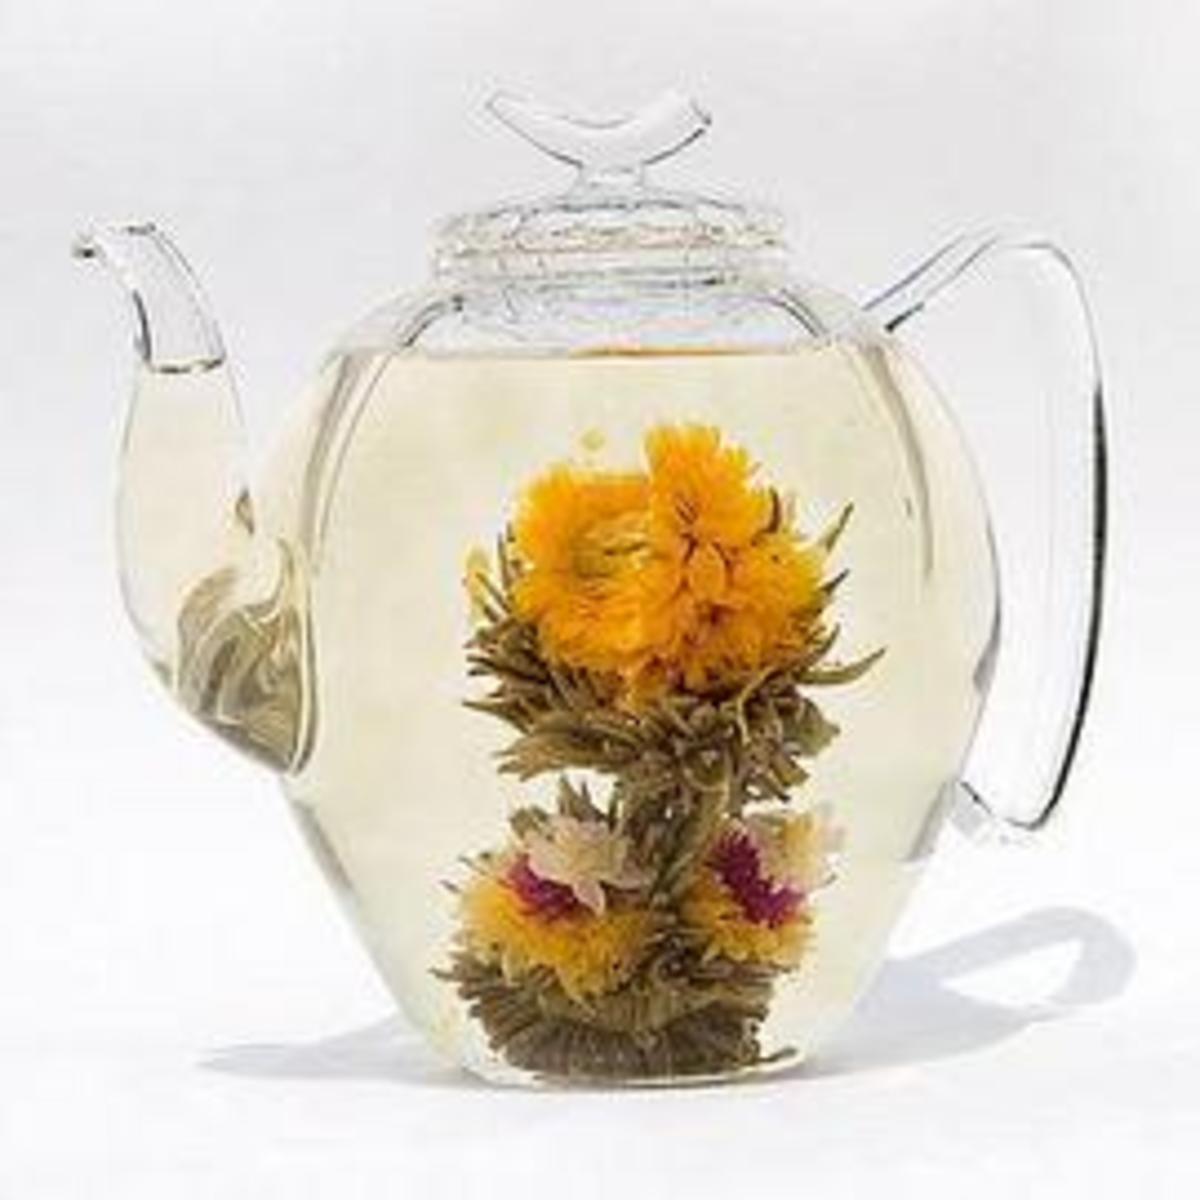 know-about-teapots-for-your-high-tea-parties